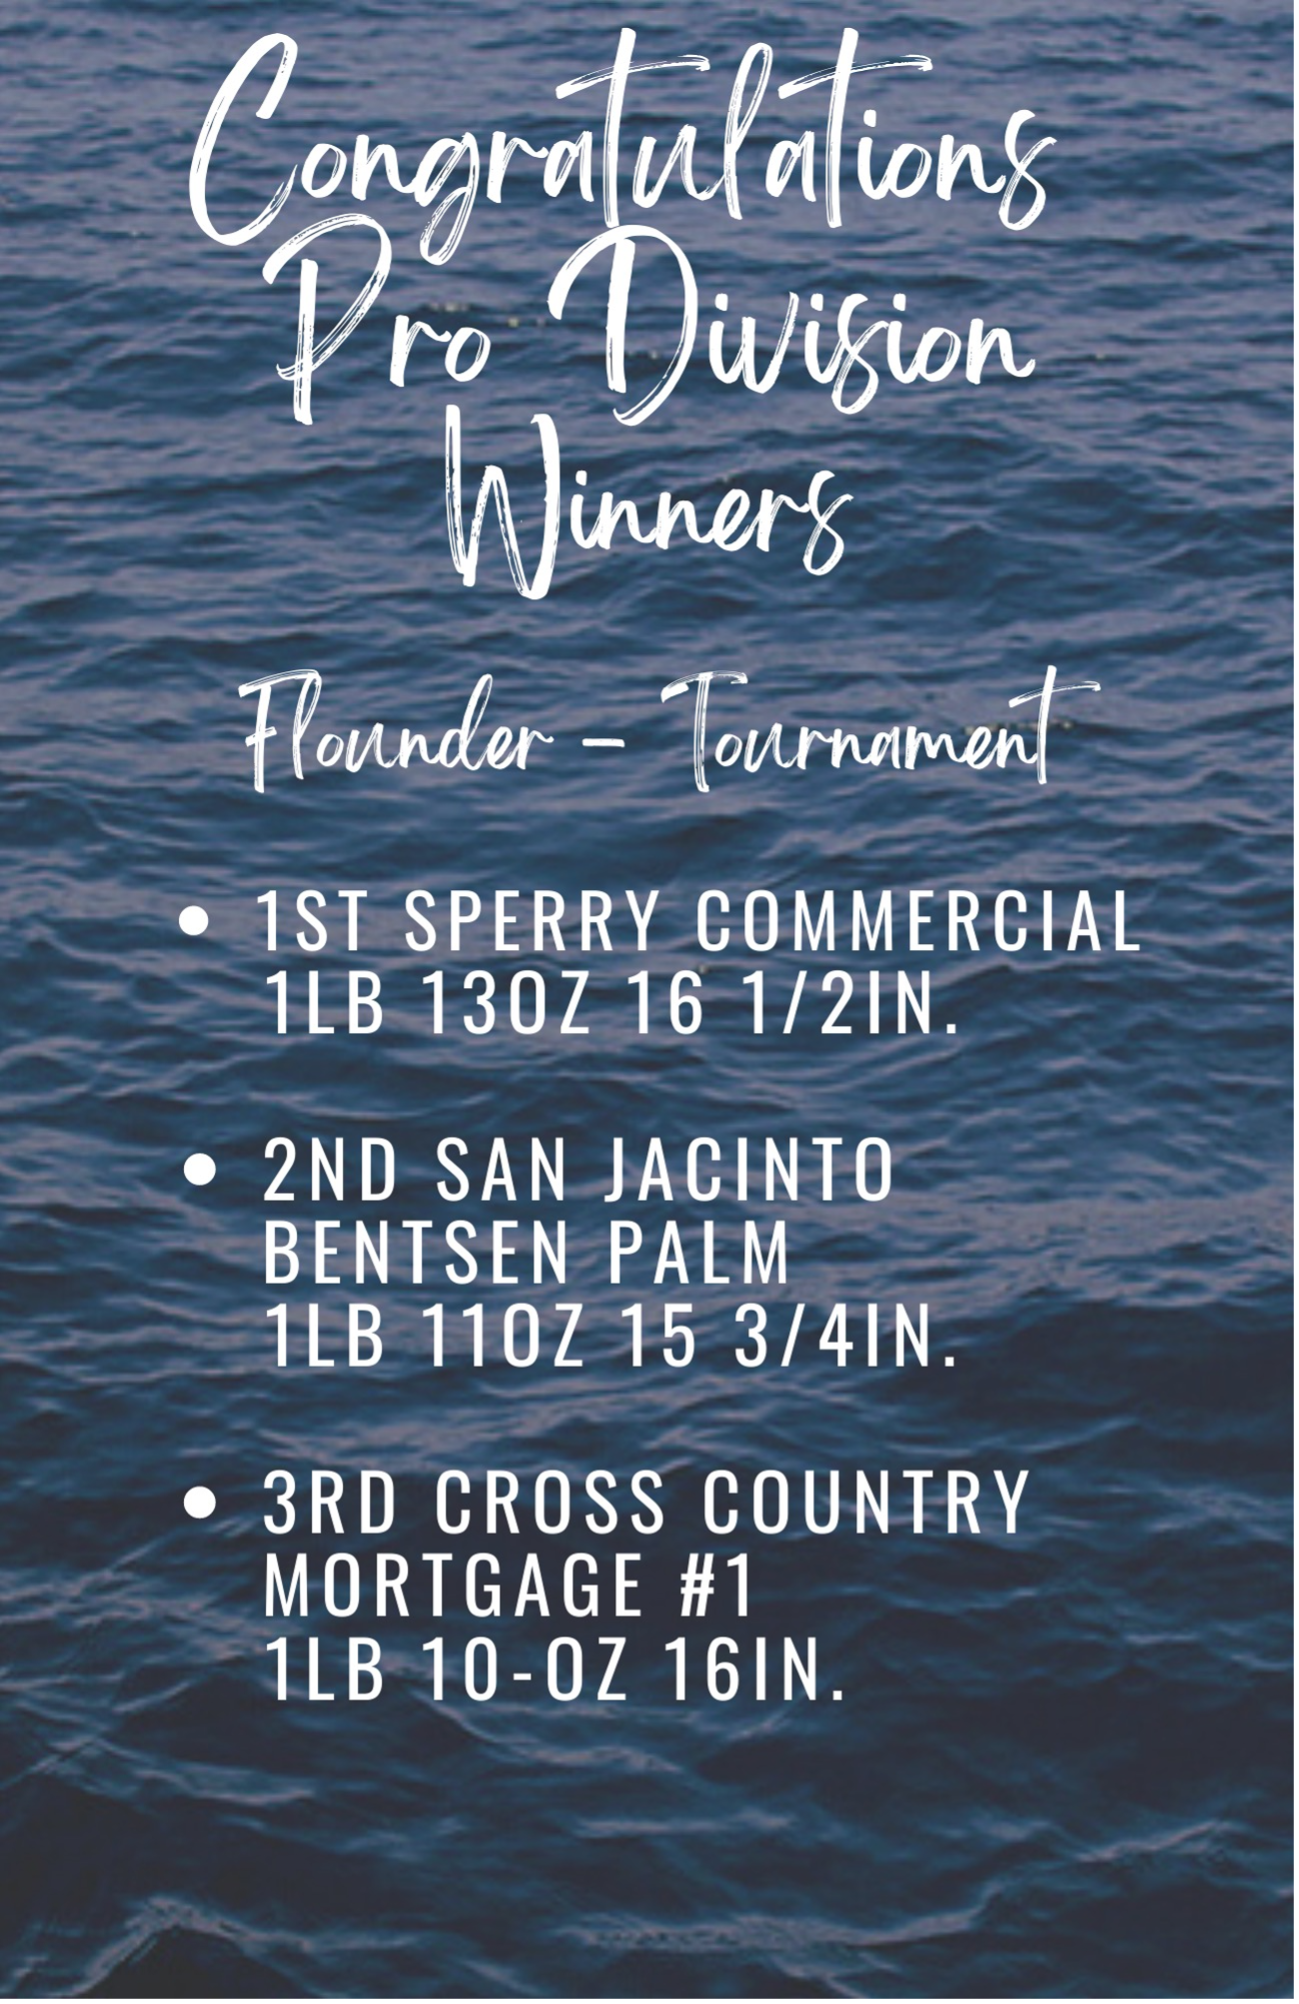 Flounder Pro Division Winners